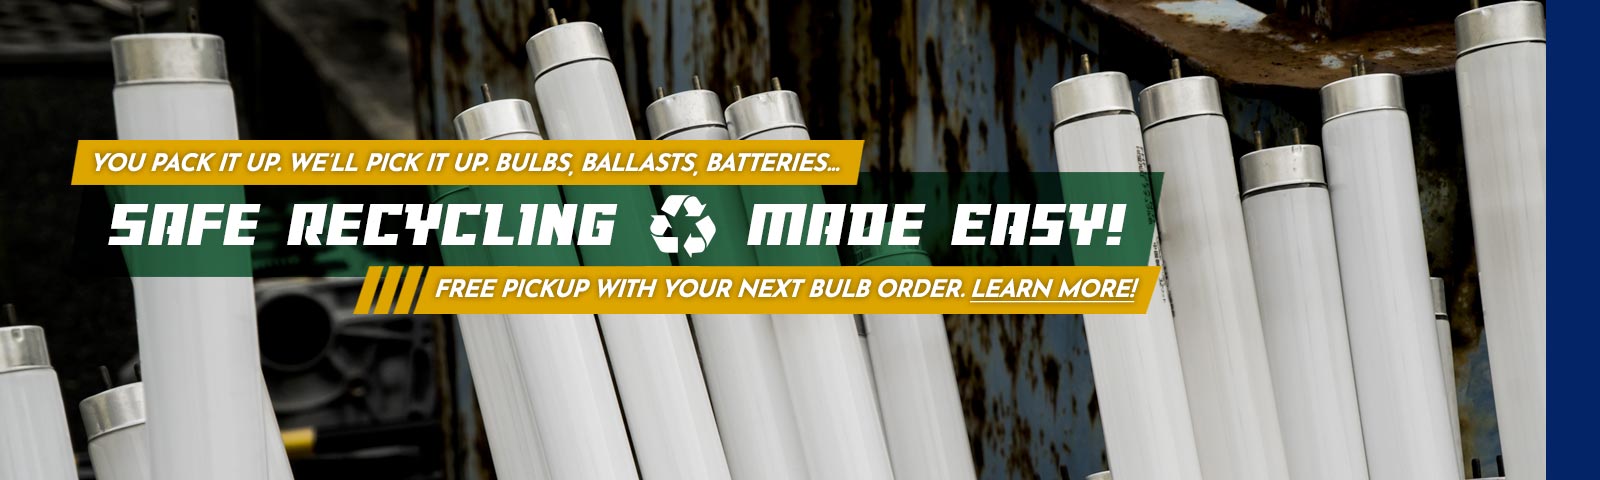 Recycling made easy - by Bay Lighting